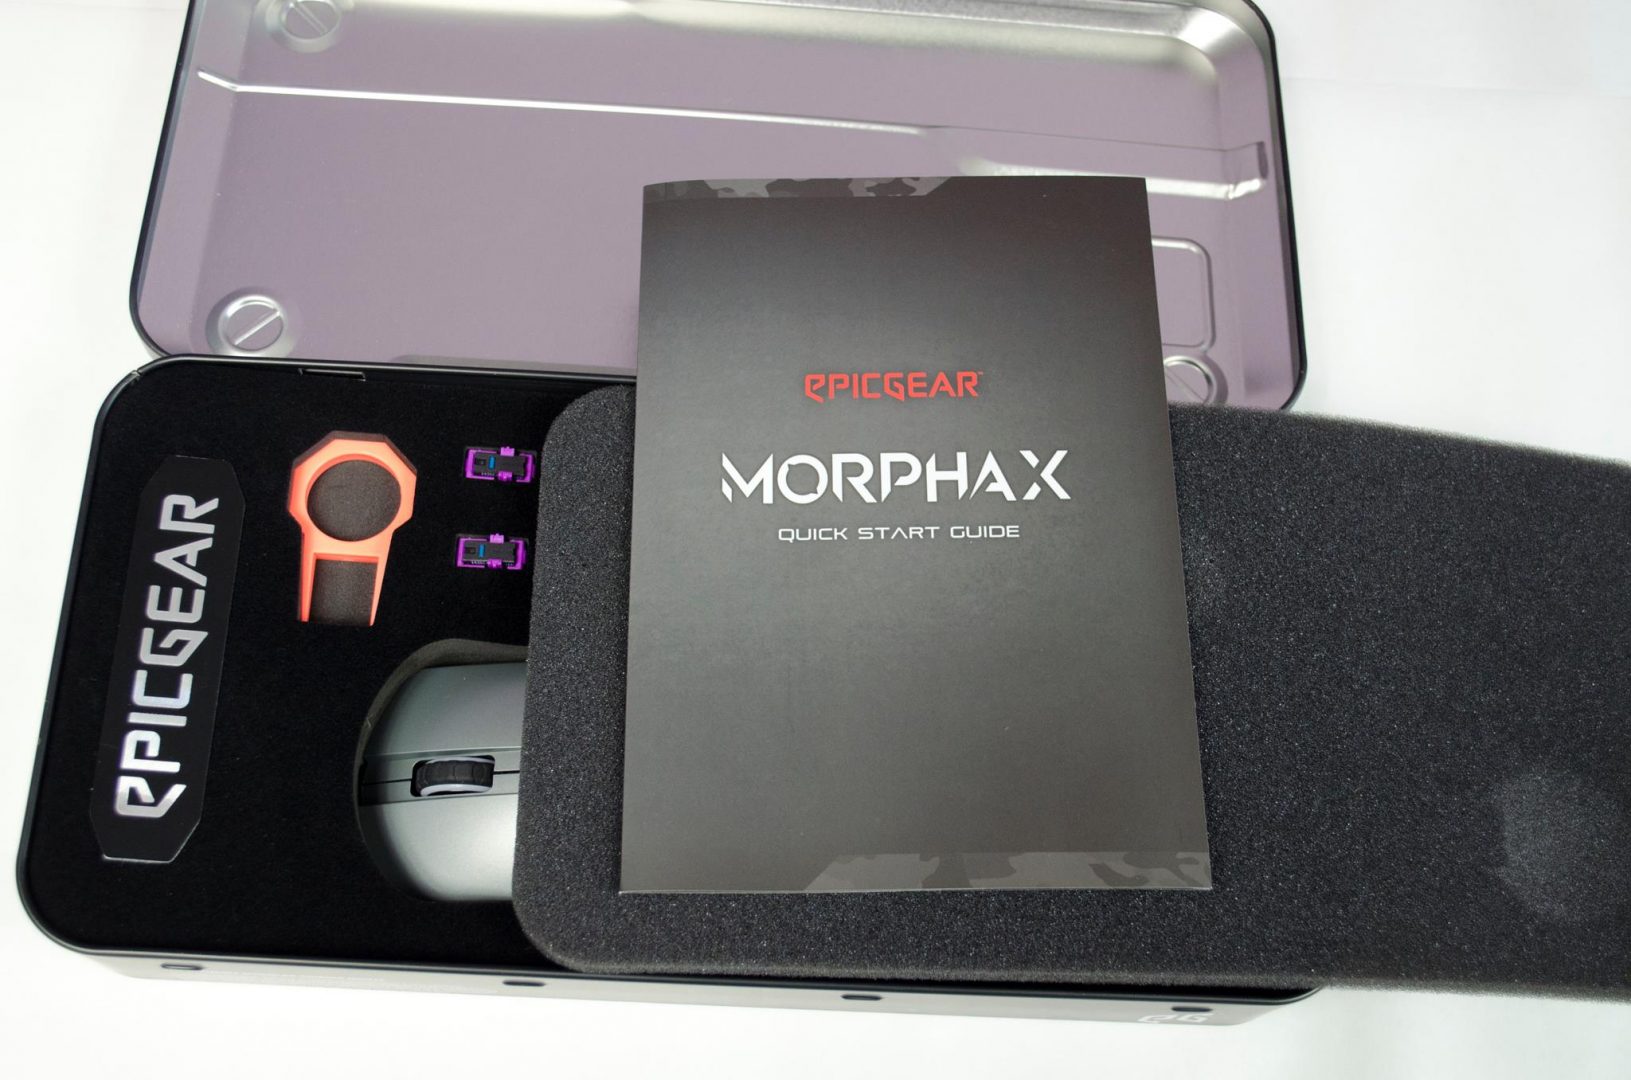 epic gear morpha x gaming mouse_5